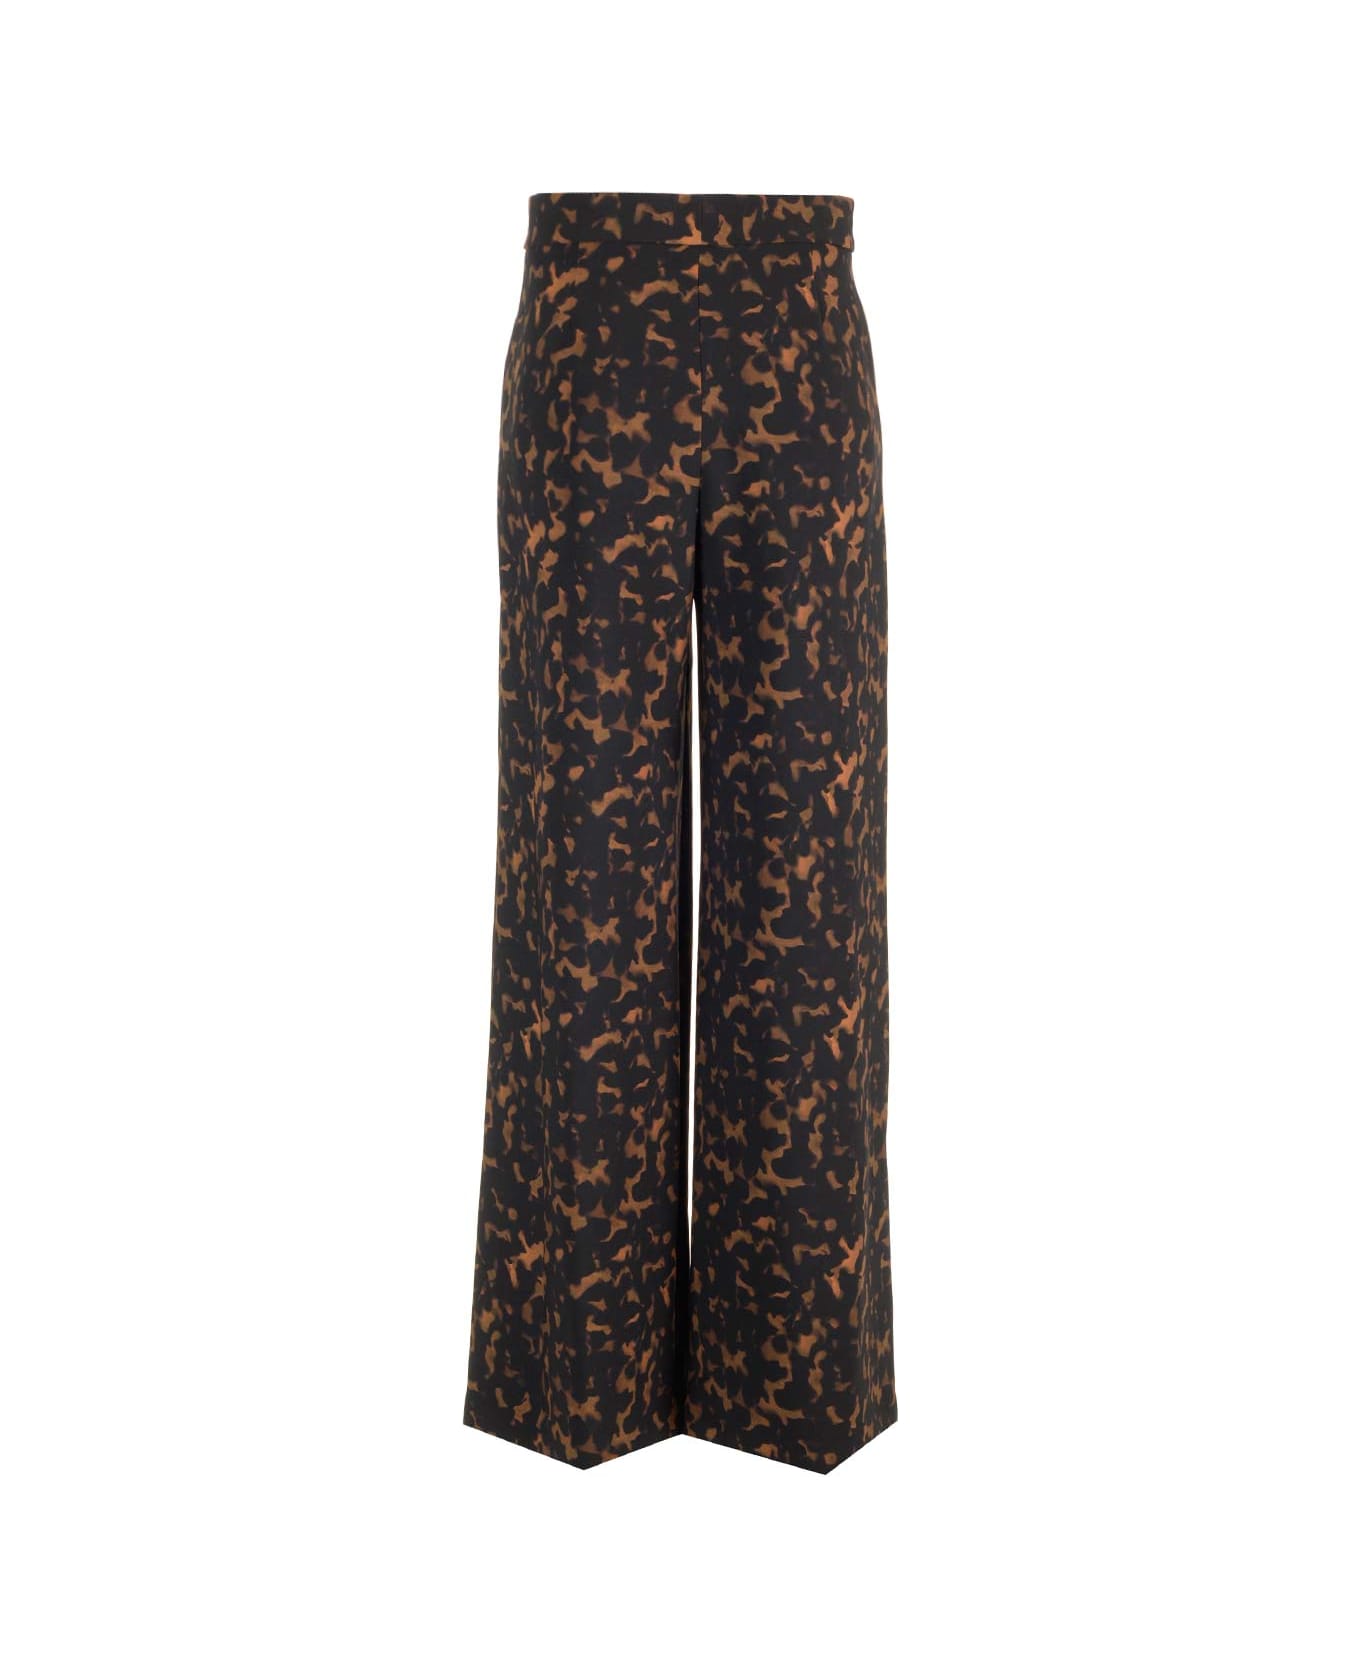 Theory High Waisted Pants - Dkh Dark Brown Multi ボトムス